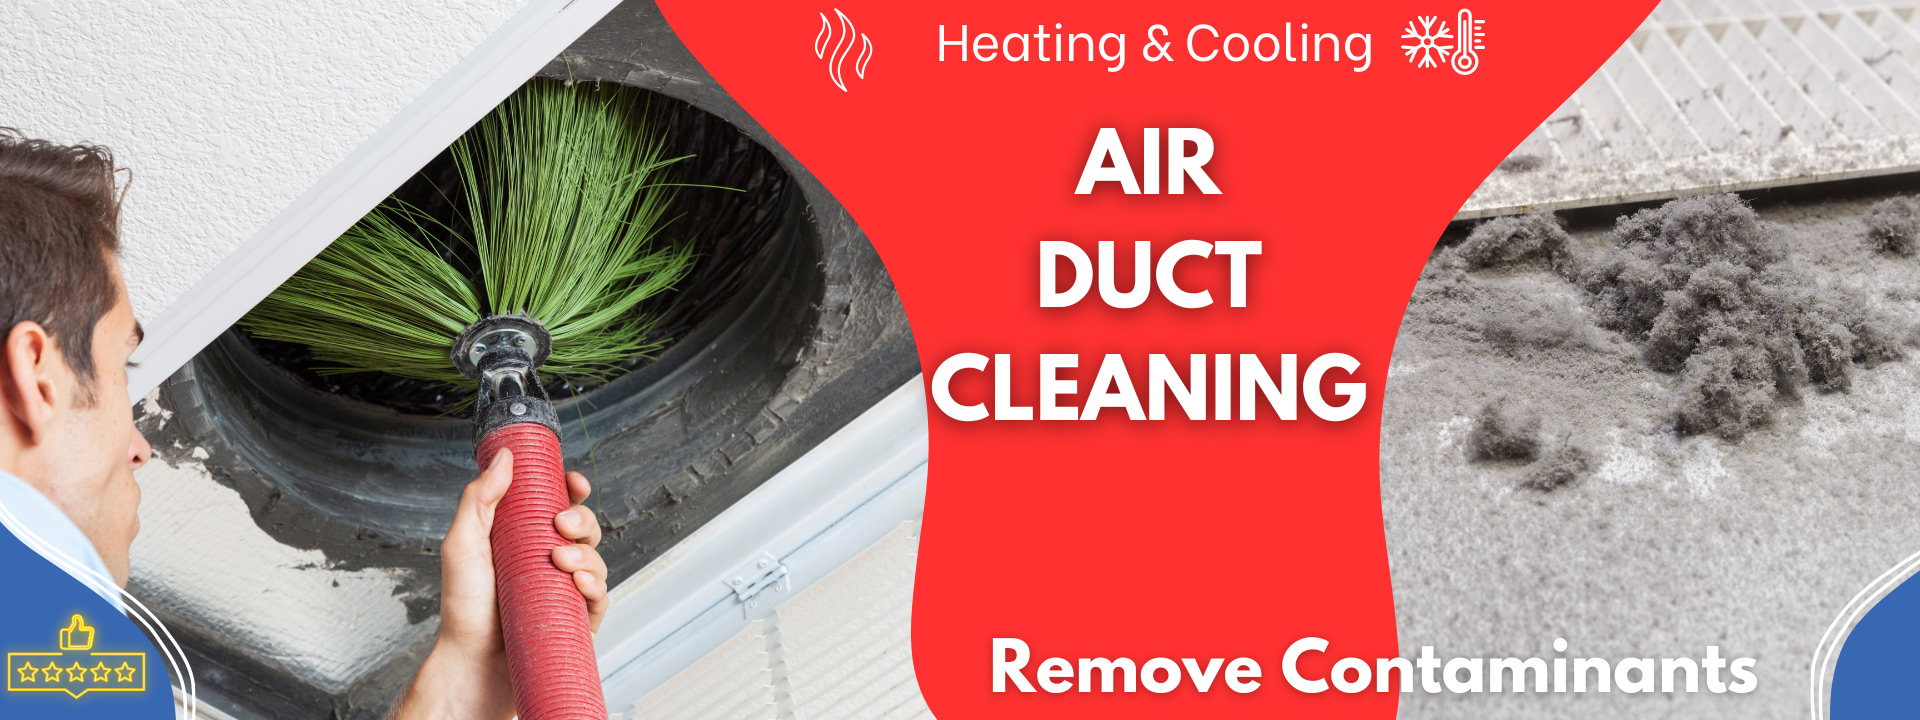 Duct Cleaning Air Vents